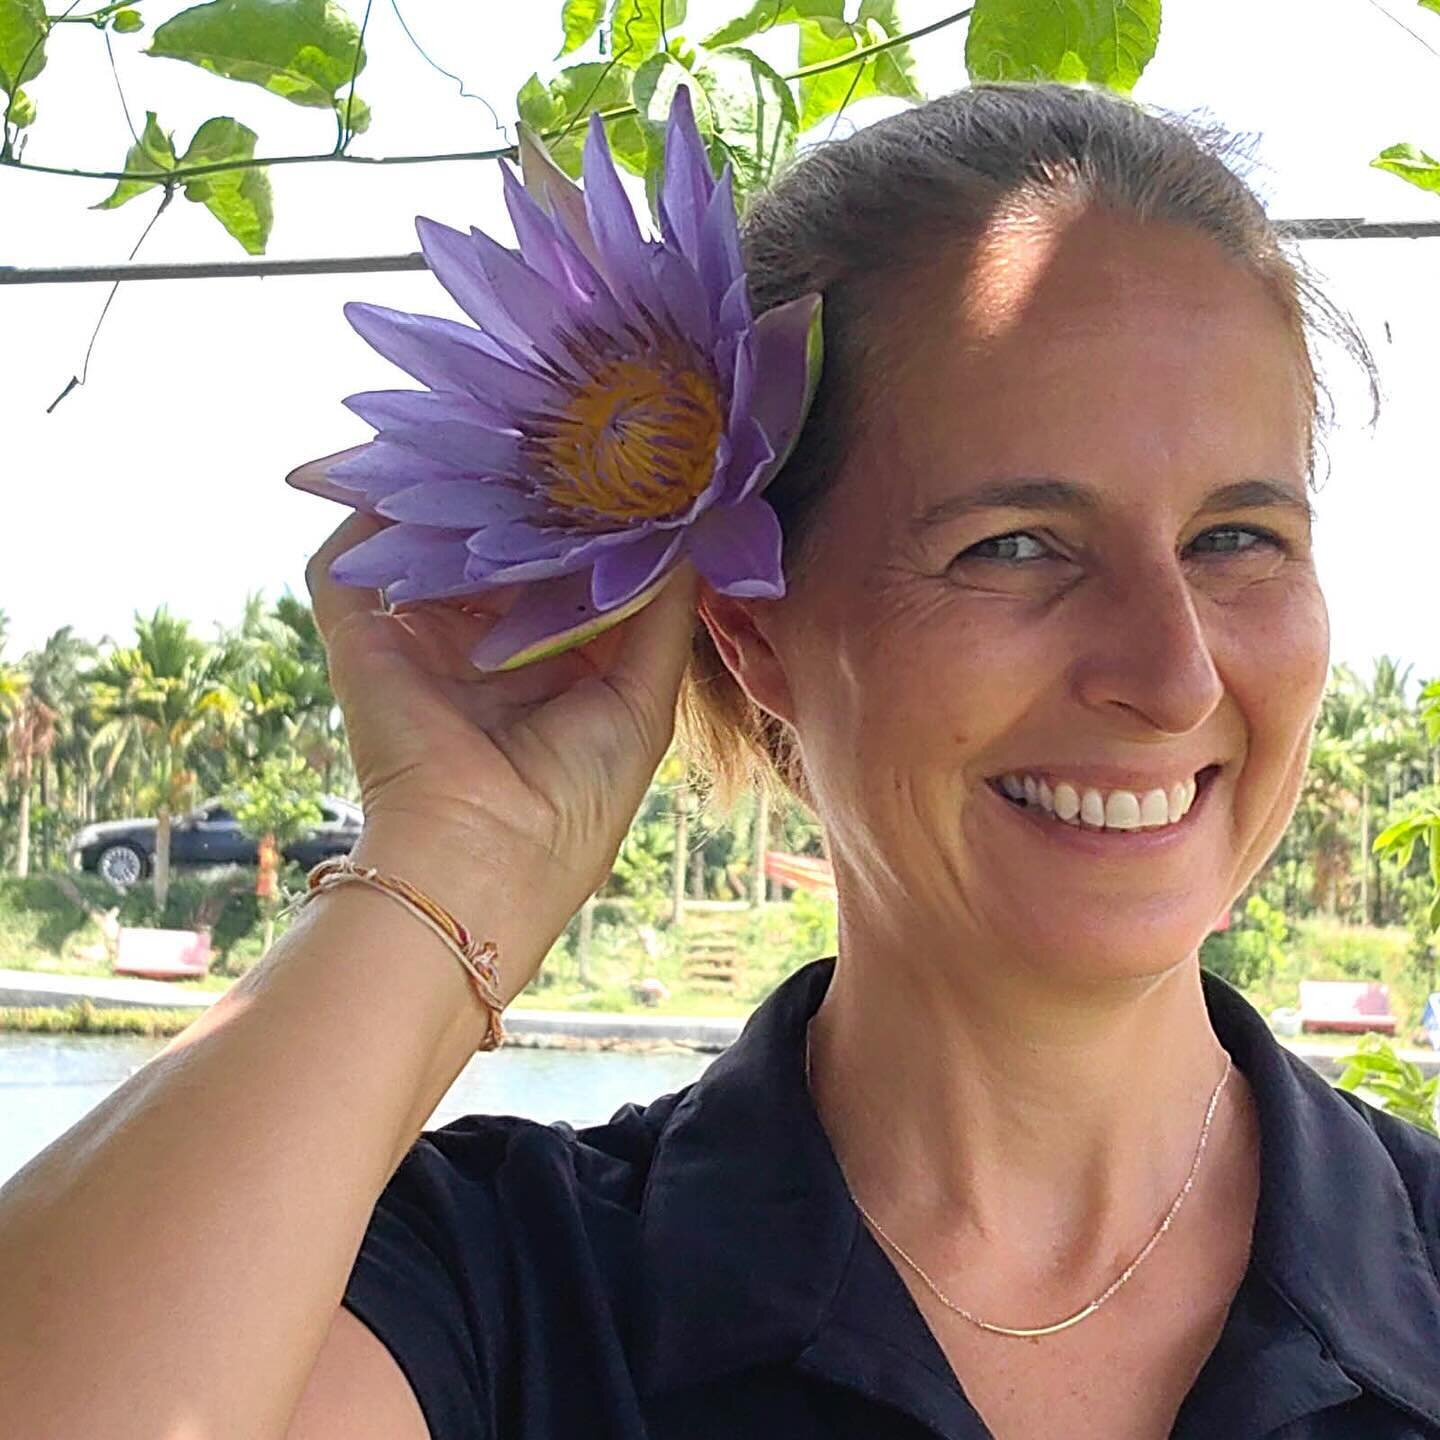 Episode 217 : In Search of Natures Fragrances Emilie Bell
Emilie Bell travels the Asia Pacific region working with farmers and communities sourcing Essential Oils. Establishing ethical and sustainable connections and practices is her primary objectiv